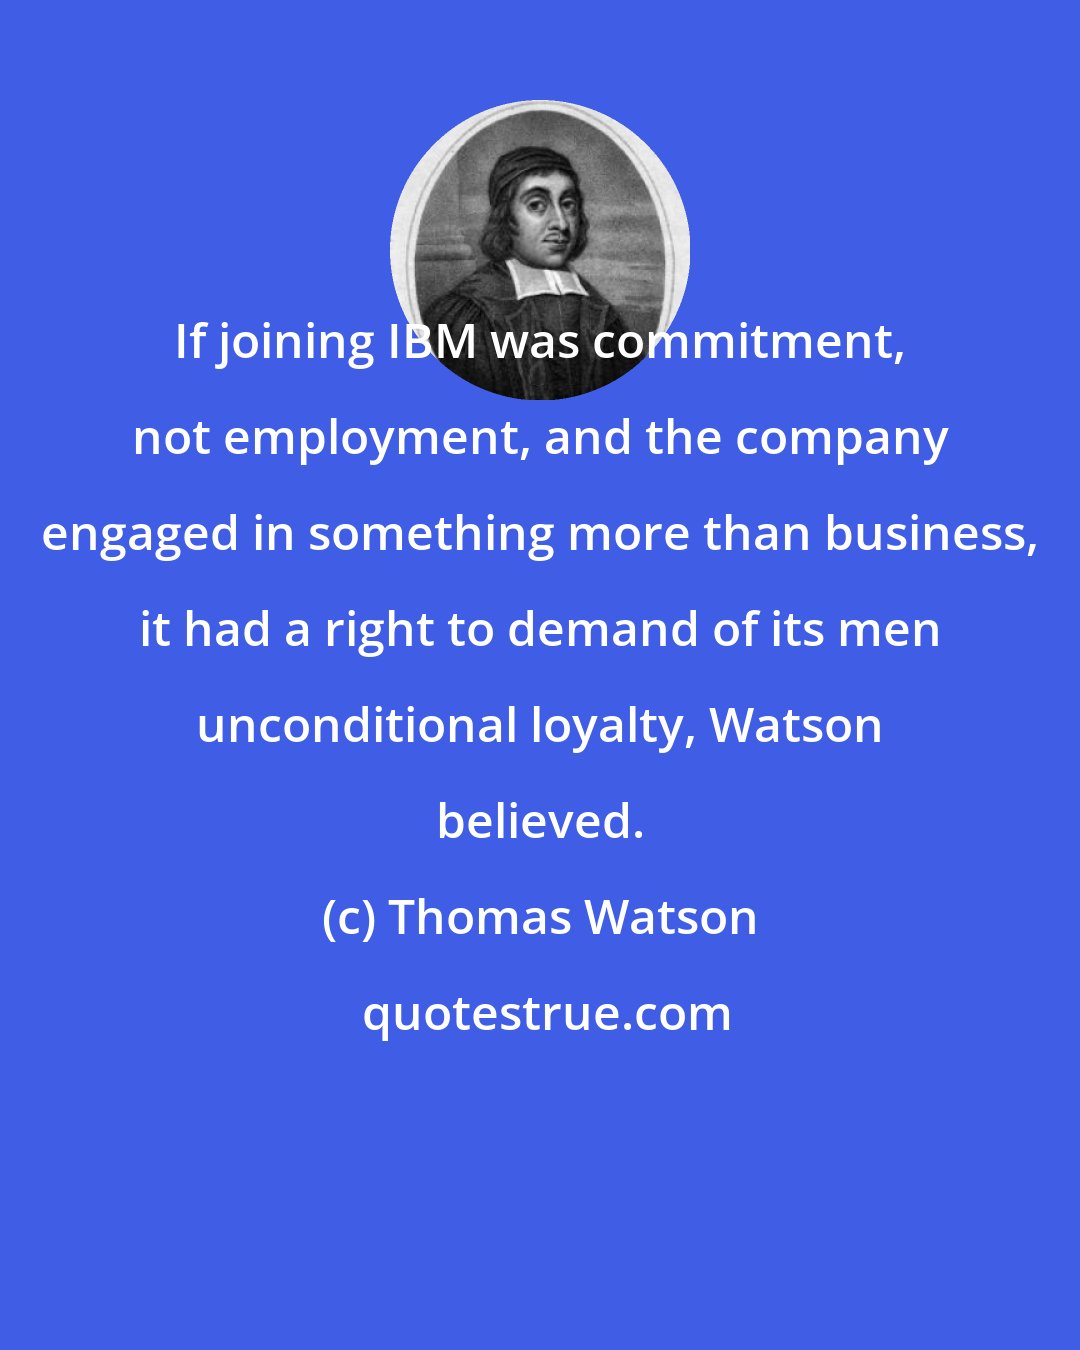 Thomas Watson: If joining IBM was commitment, not employment, and the company engaged in something more than business, it had a right to demand of its men unconditional loyalty, Watson believed.